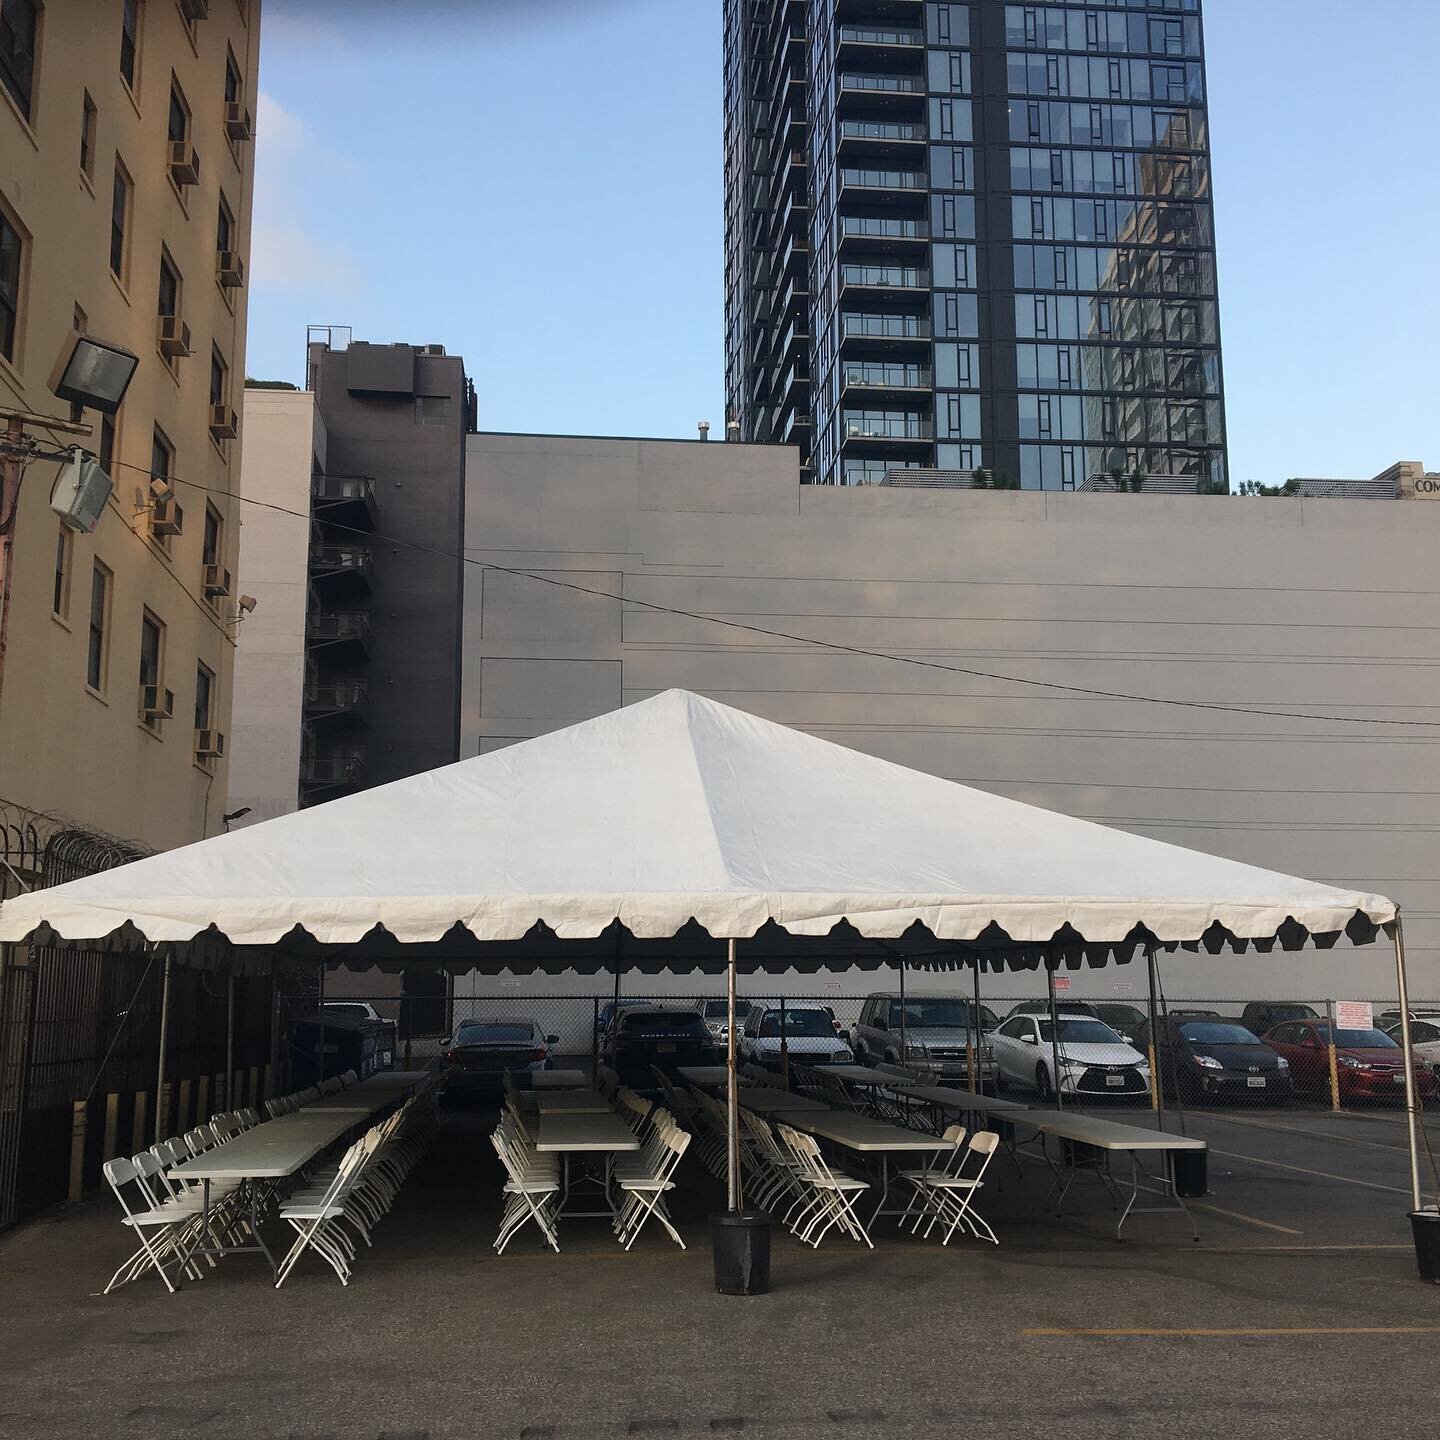 30x50 Canopy w/190 Chairs and 25 - 8&rsquo; long tables 📞 (310) 635-1723
💻www.iandopartyrentals.com
🏫 134 W. Gardena Blvd  Gardena, CA 90248

#canopy #event #tables #chairs #losangeles #downtownla #california #party #privateevent #vip #callnow #bo